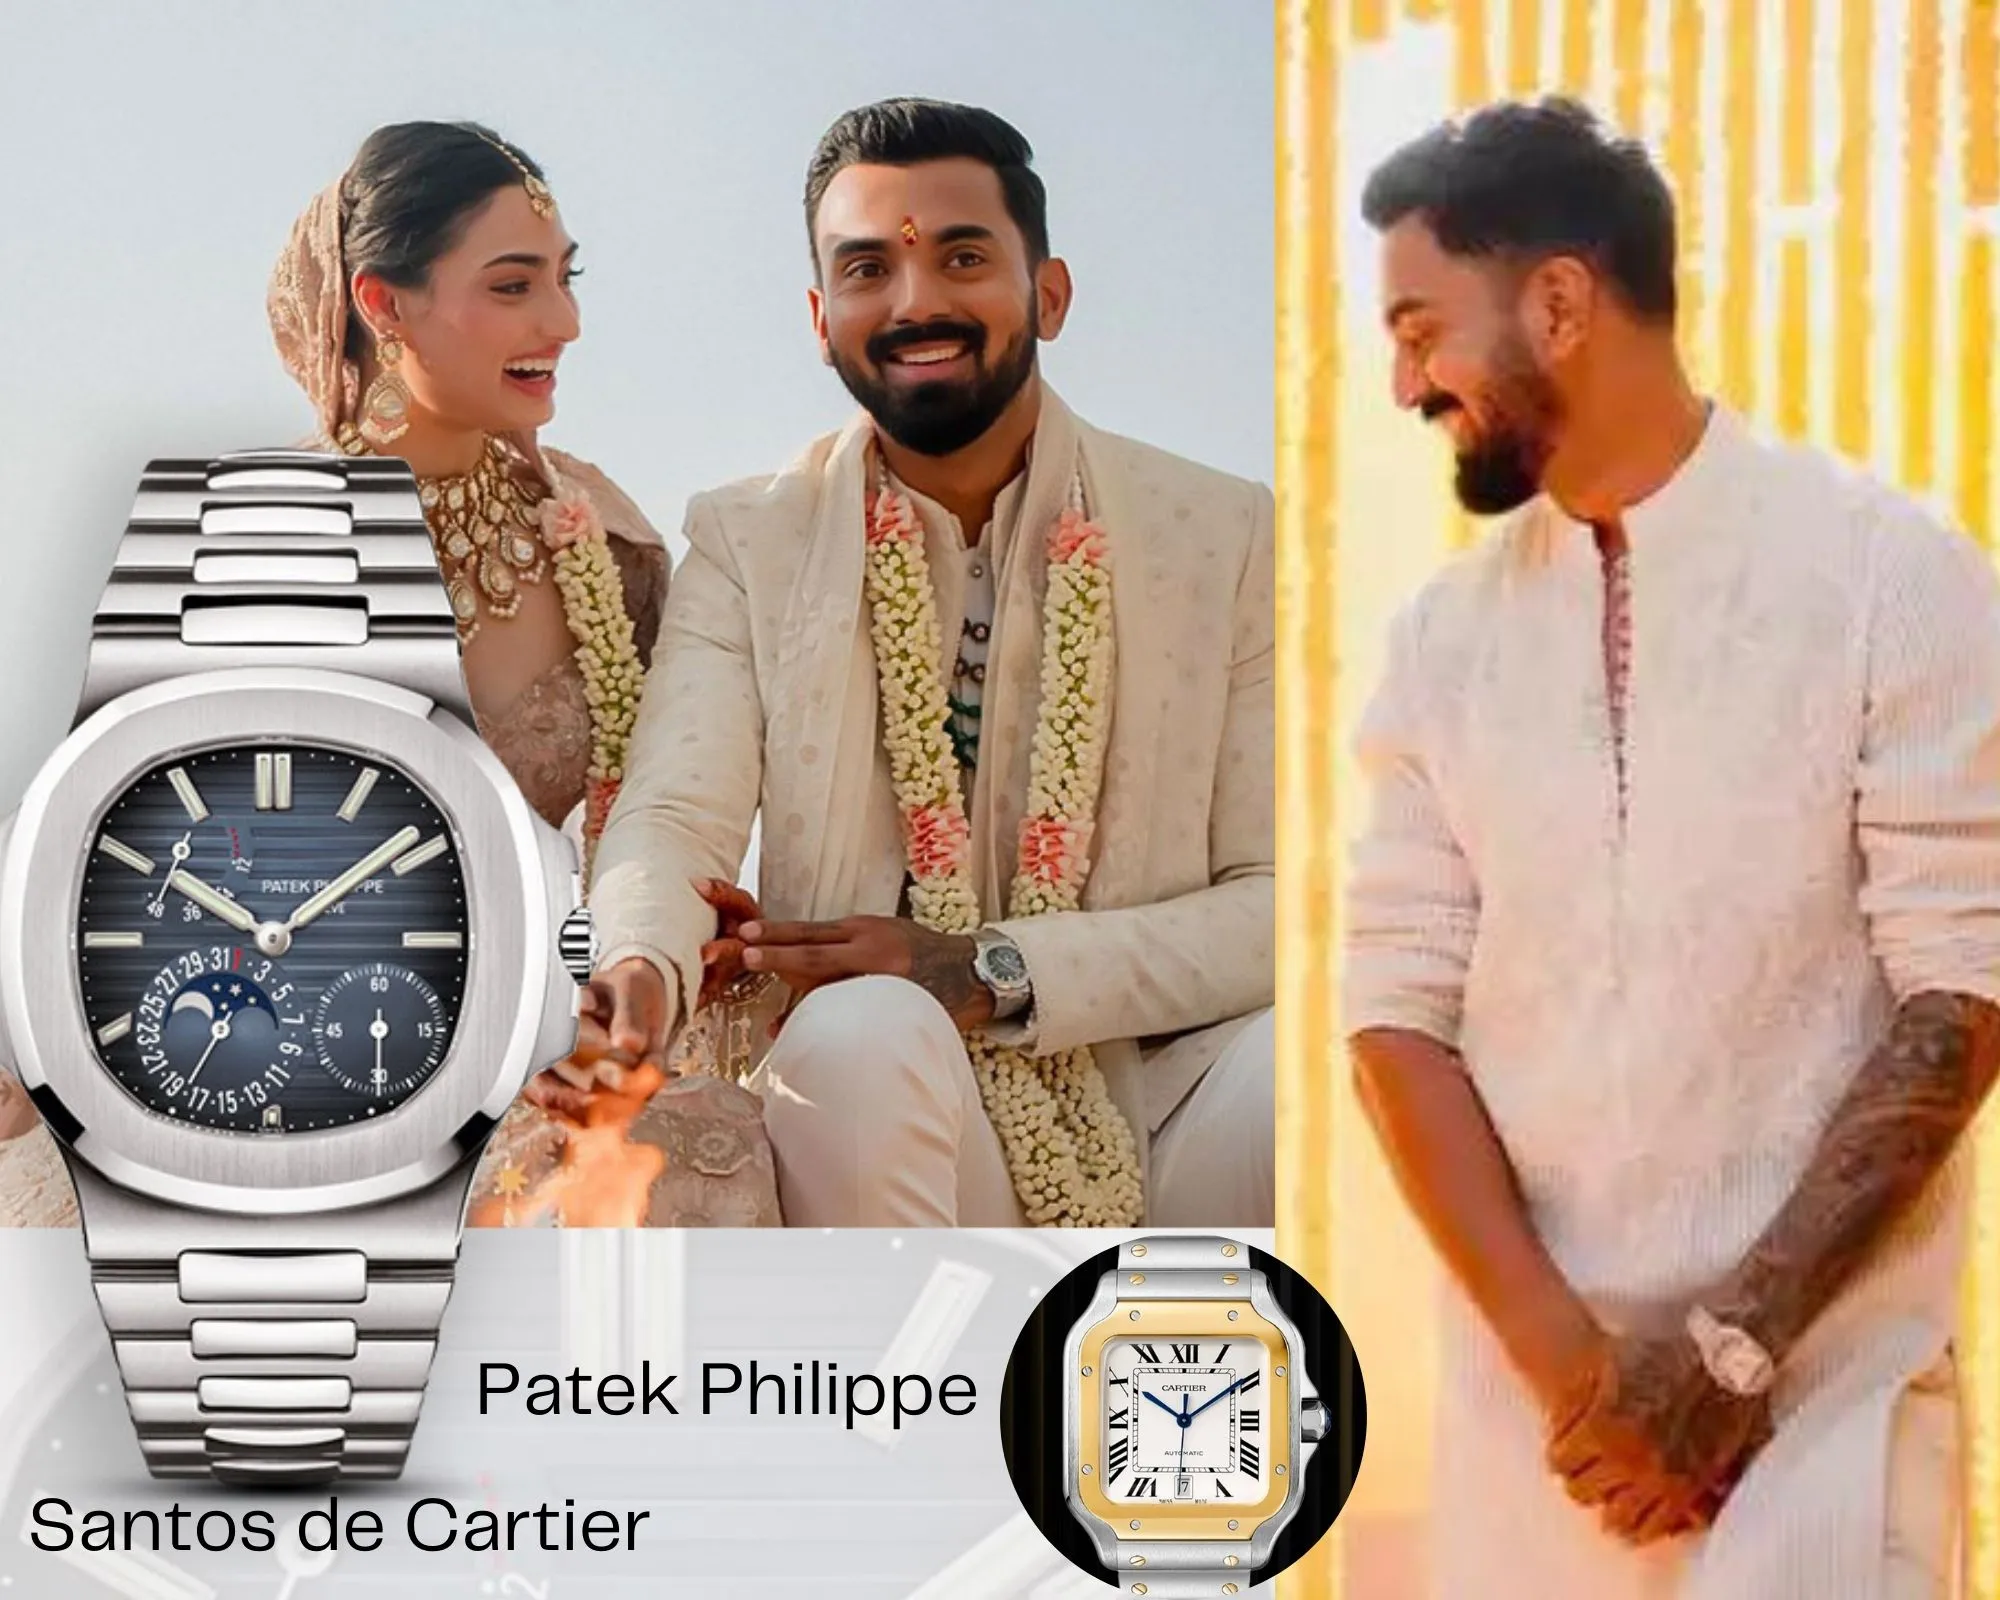 KL Rahul's Choice of Patek Philippe and Cartier
